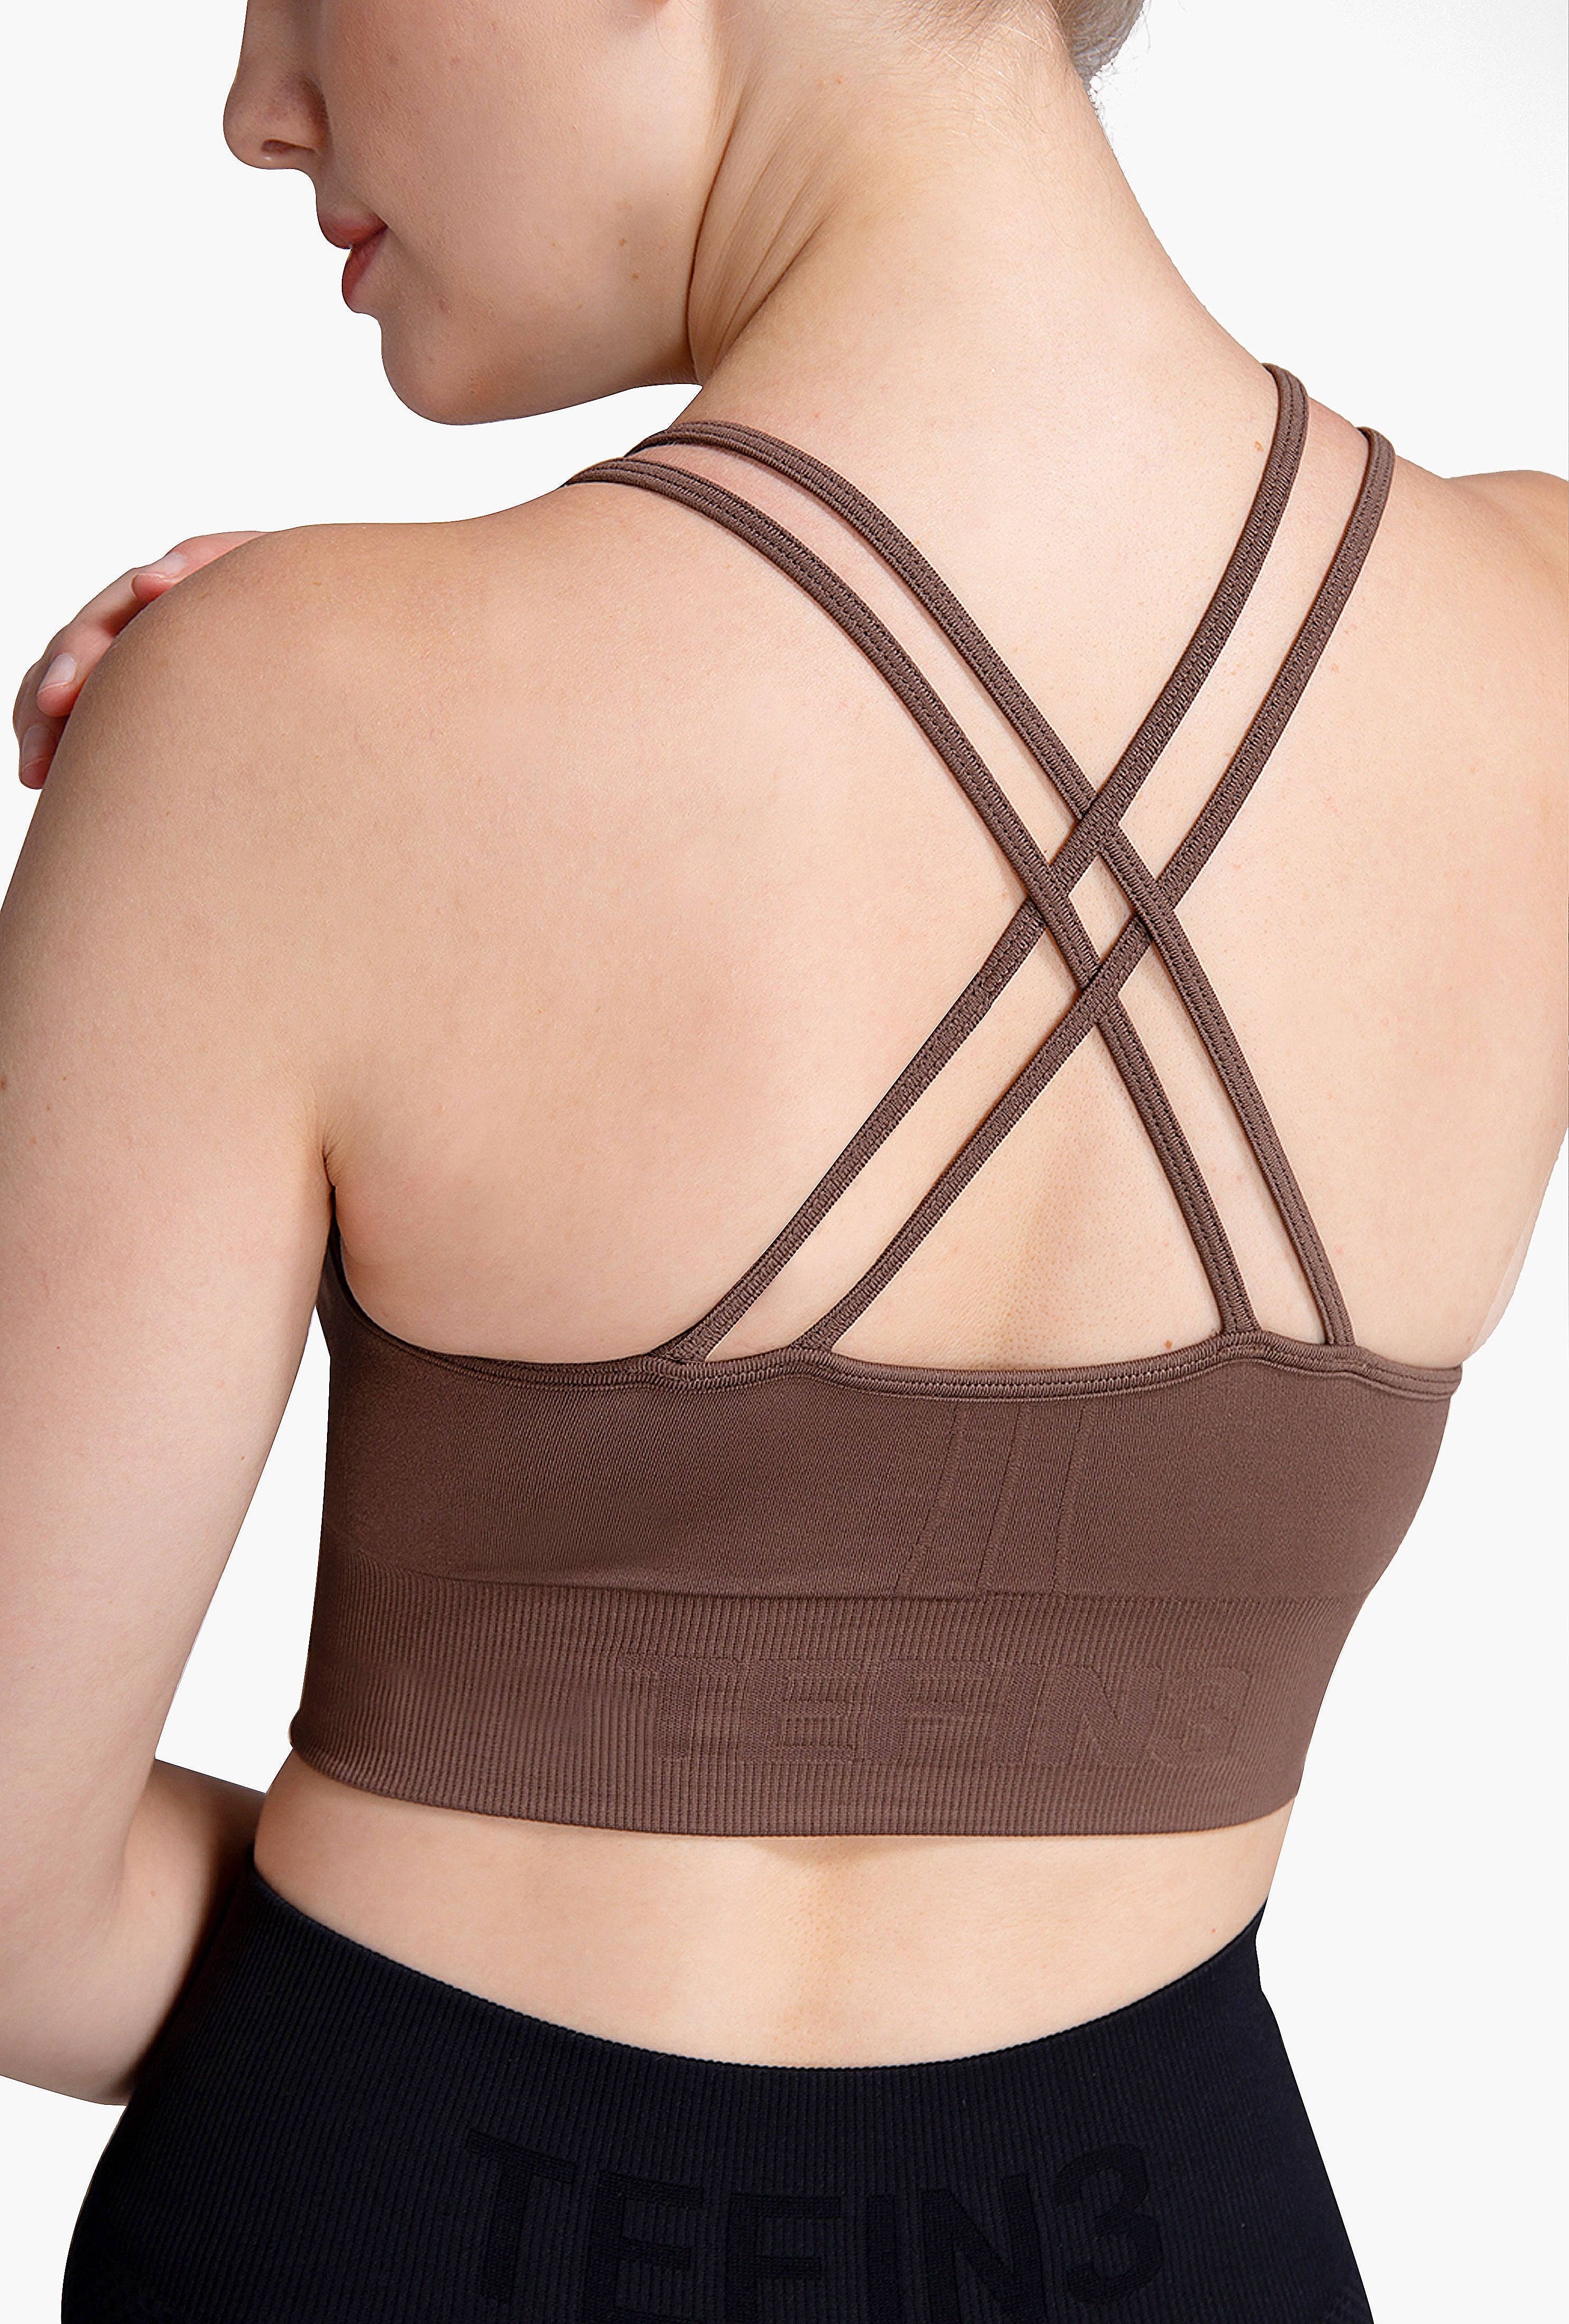 Empower Seamless Shorts - Cocoa Brown  Empowerment, Shorts, Sports bra  sizing